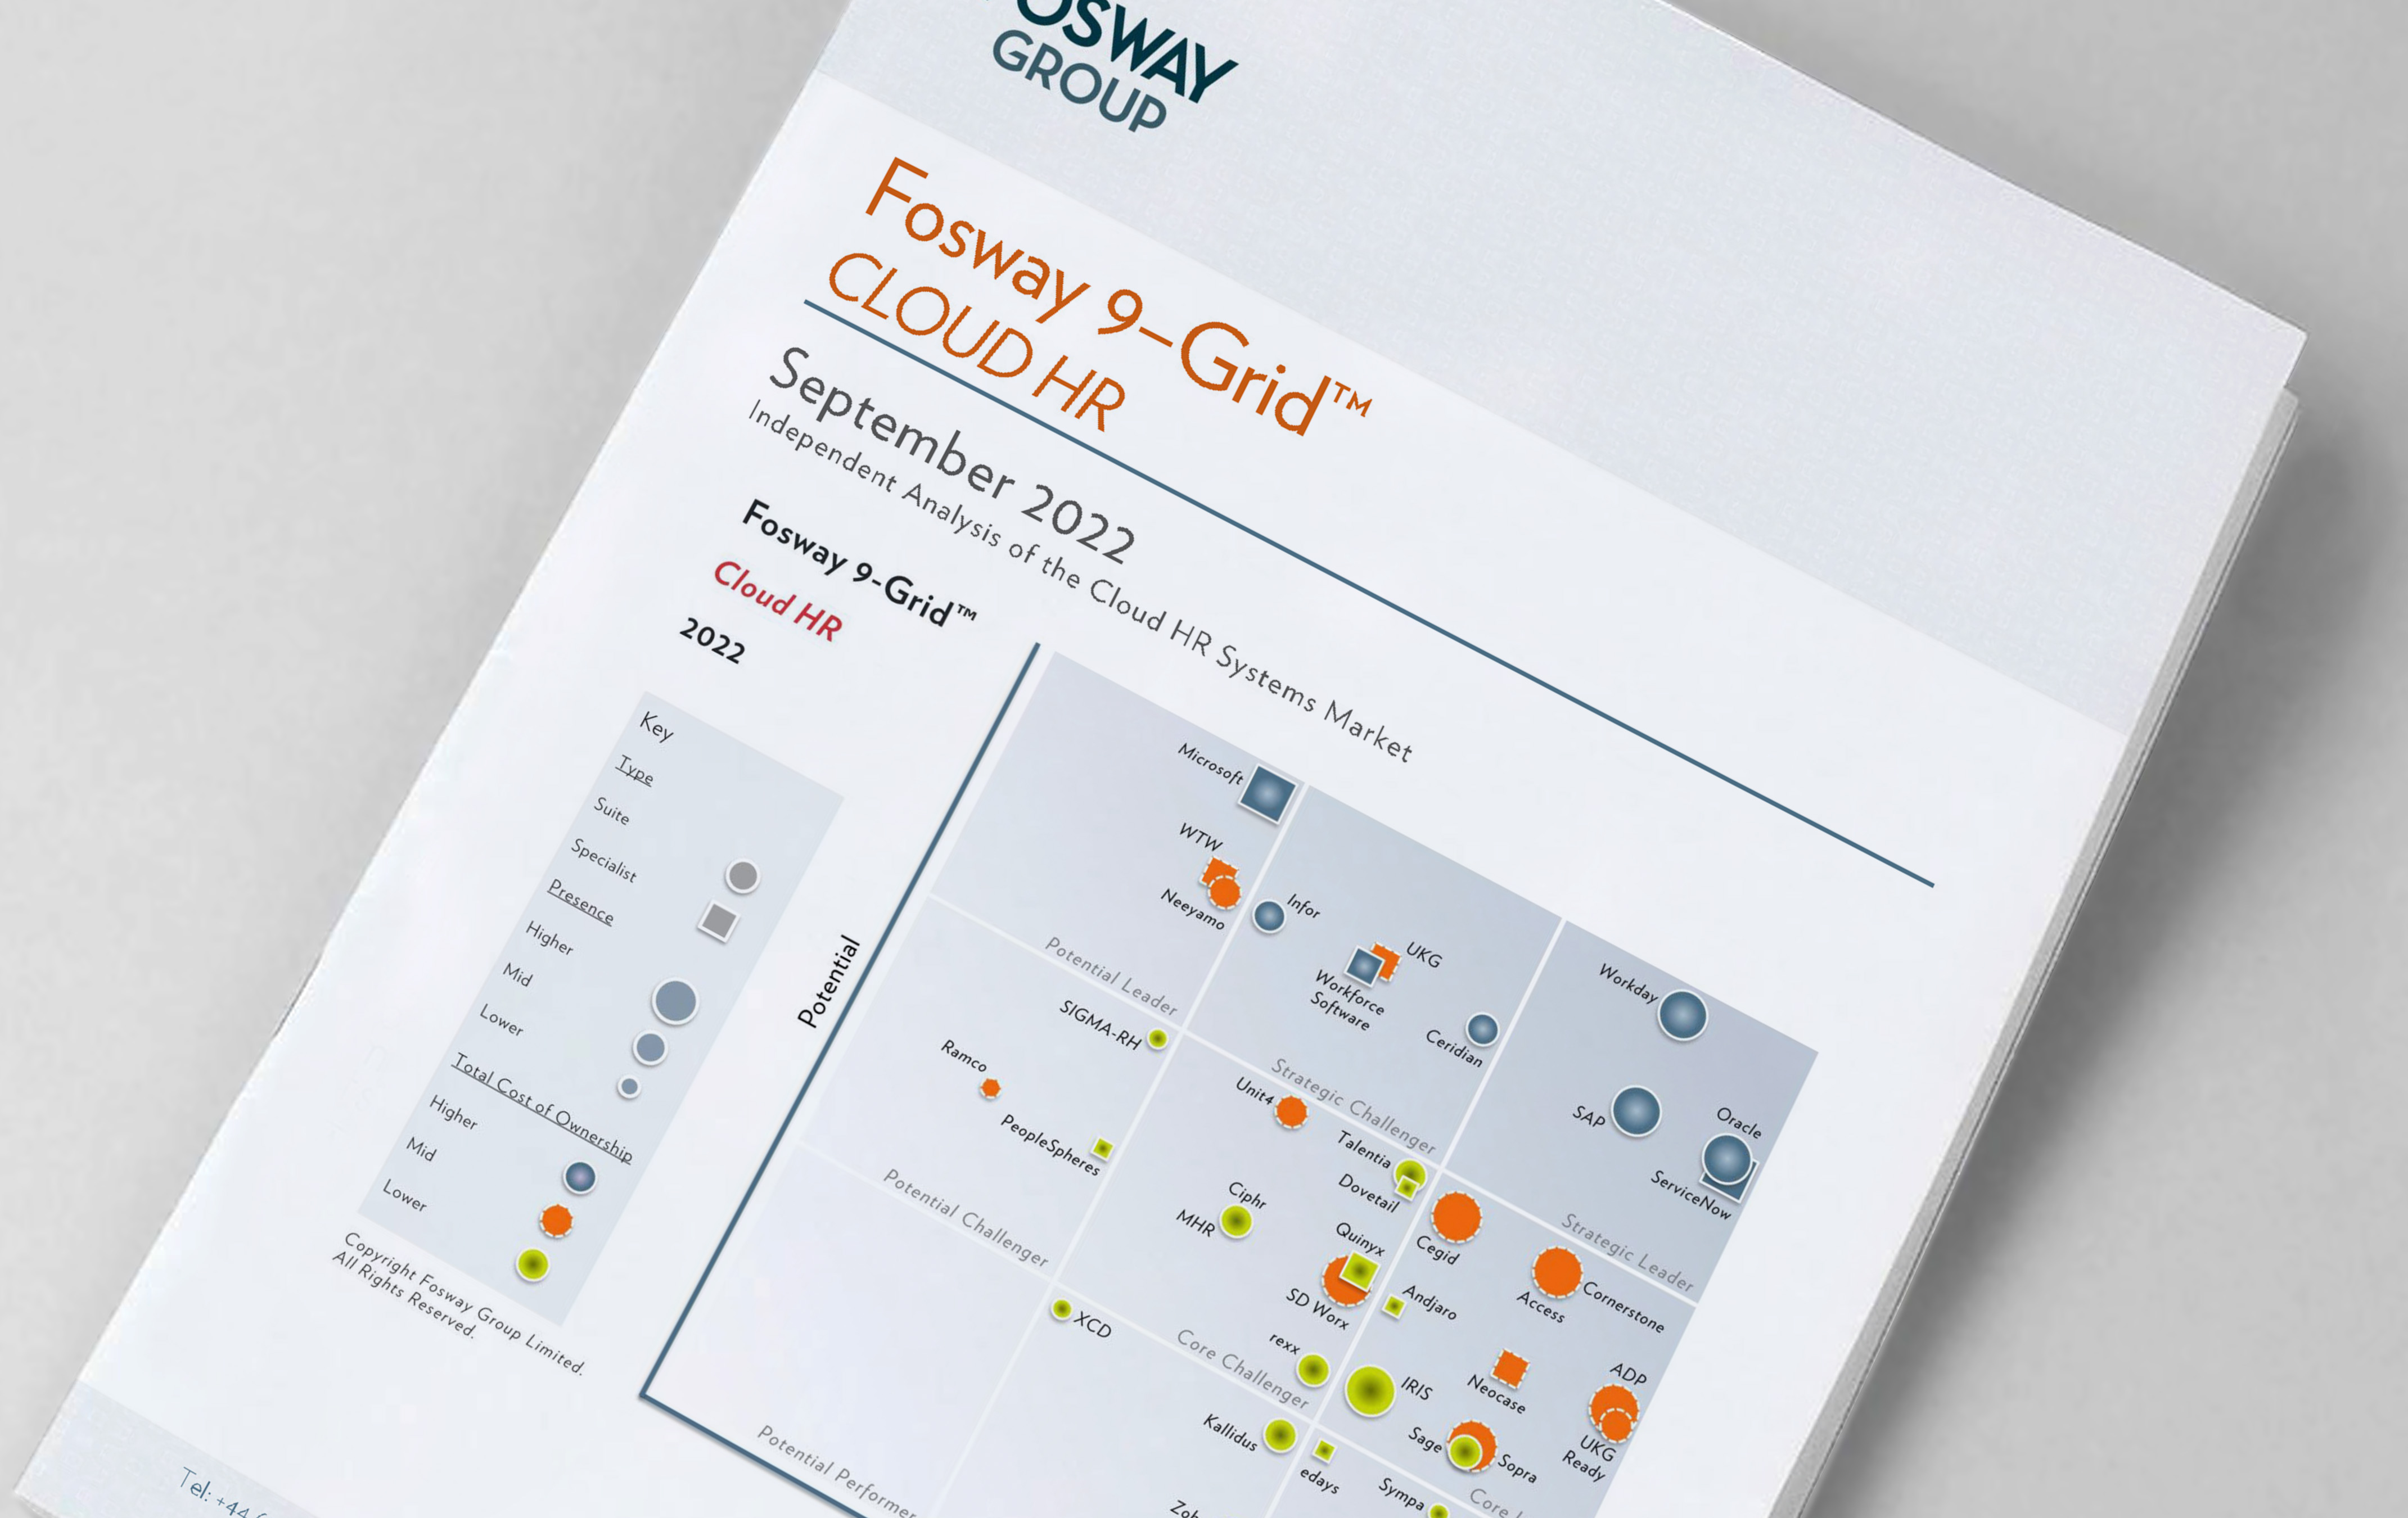 Cover image for Fosway 9-Grid for Cloud HR